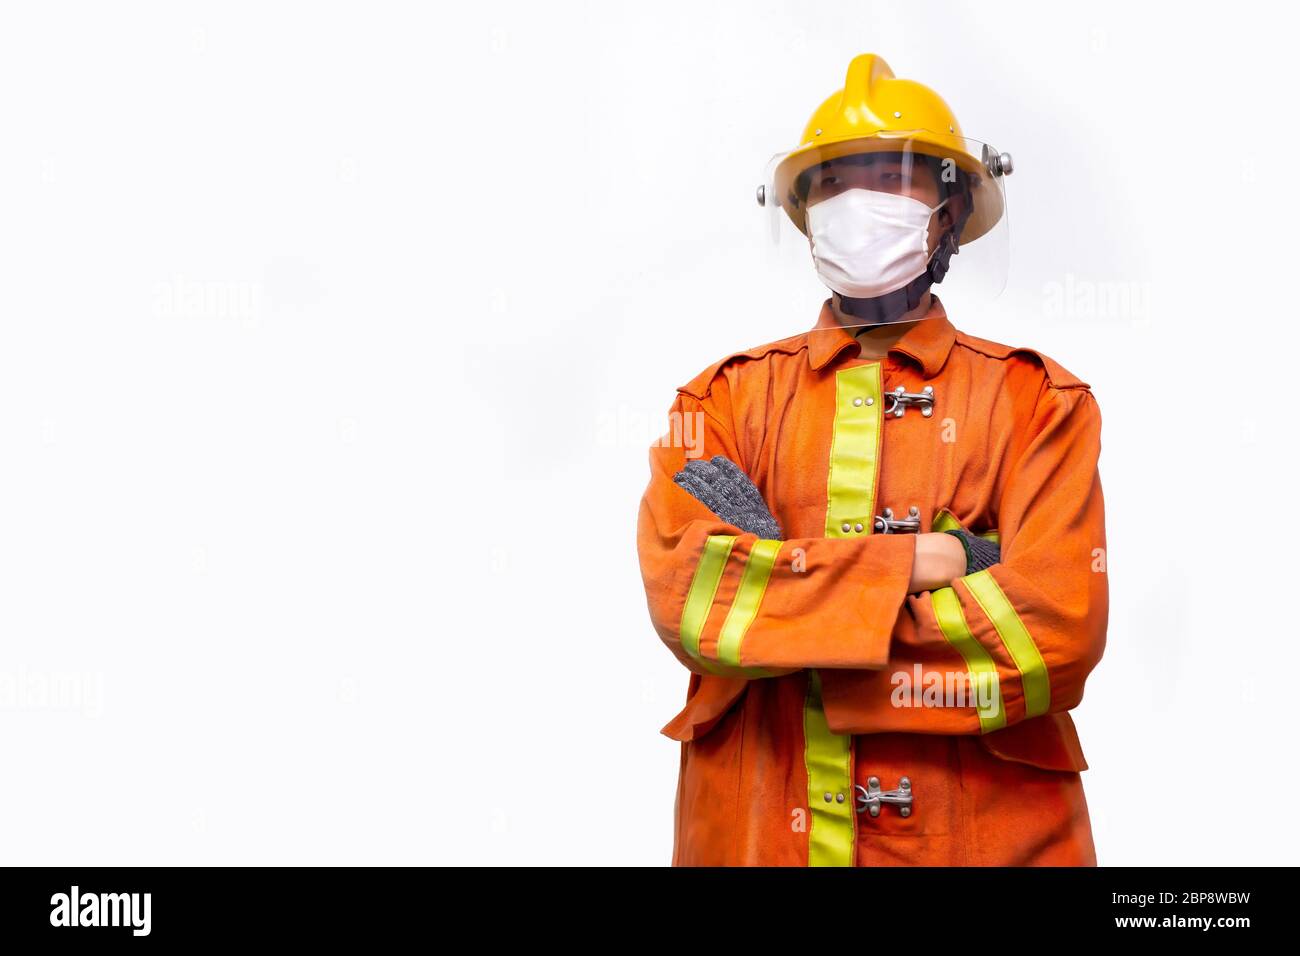 Firefighter rescue, fireman standing portrait isolated on white background. Stock Photo